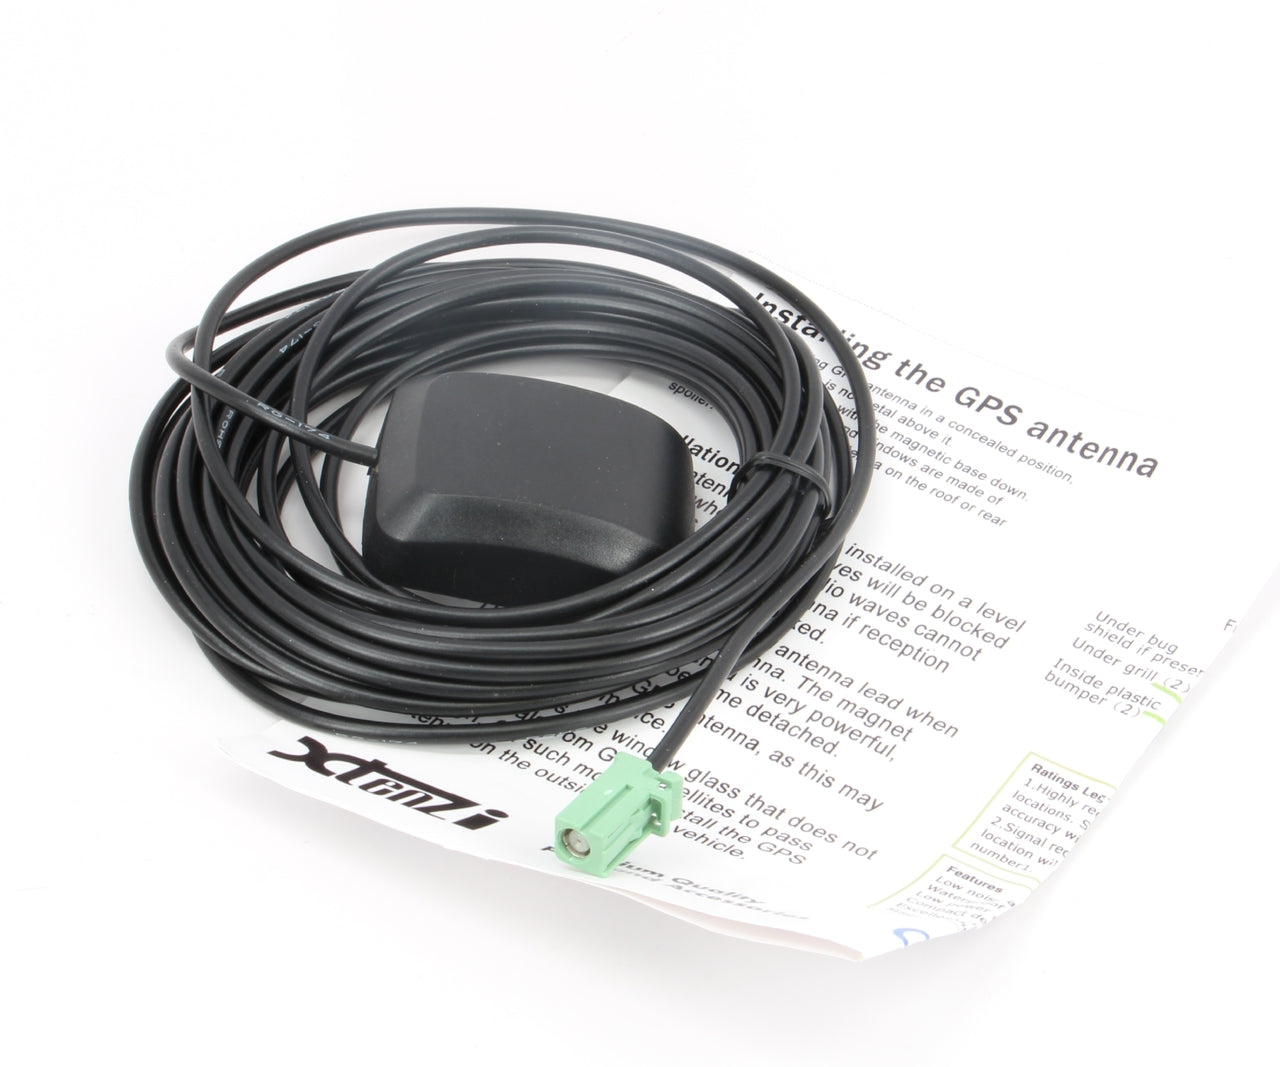 Xtenzi Connection Cable Set for Pioneer AVIC-X940BT AVIC-Z140BH GPS MIC RCA Wire Harness USB AUX Cable 5PCS Set